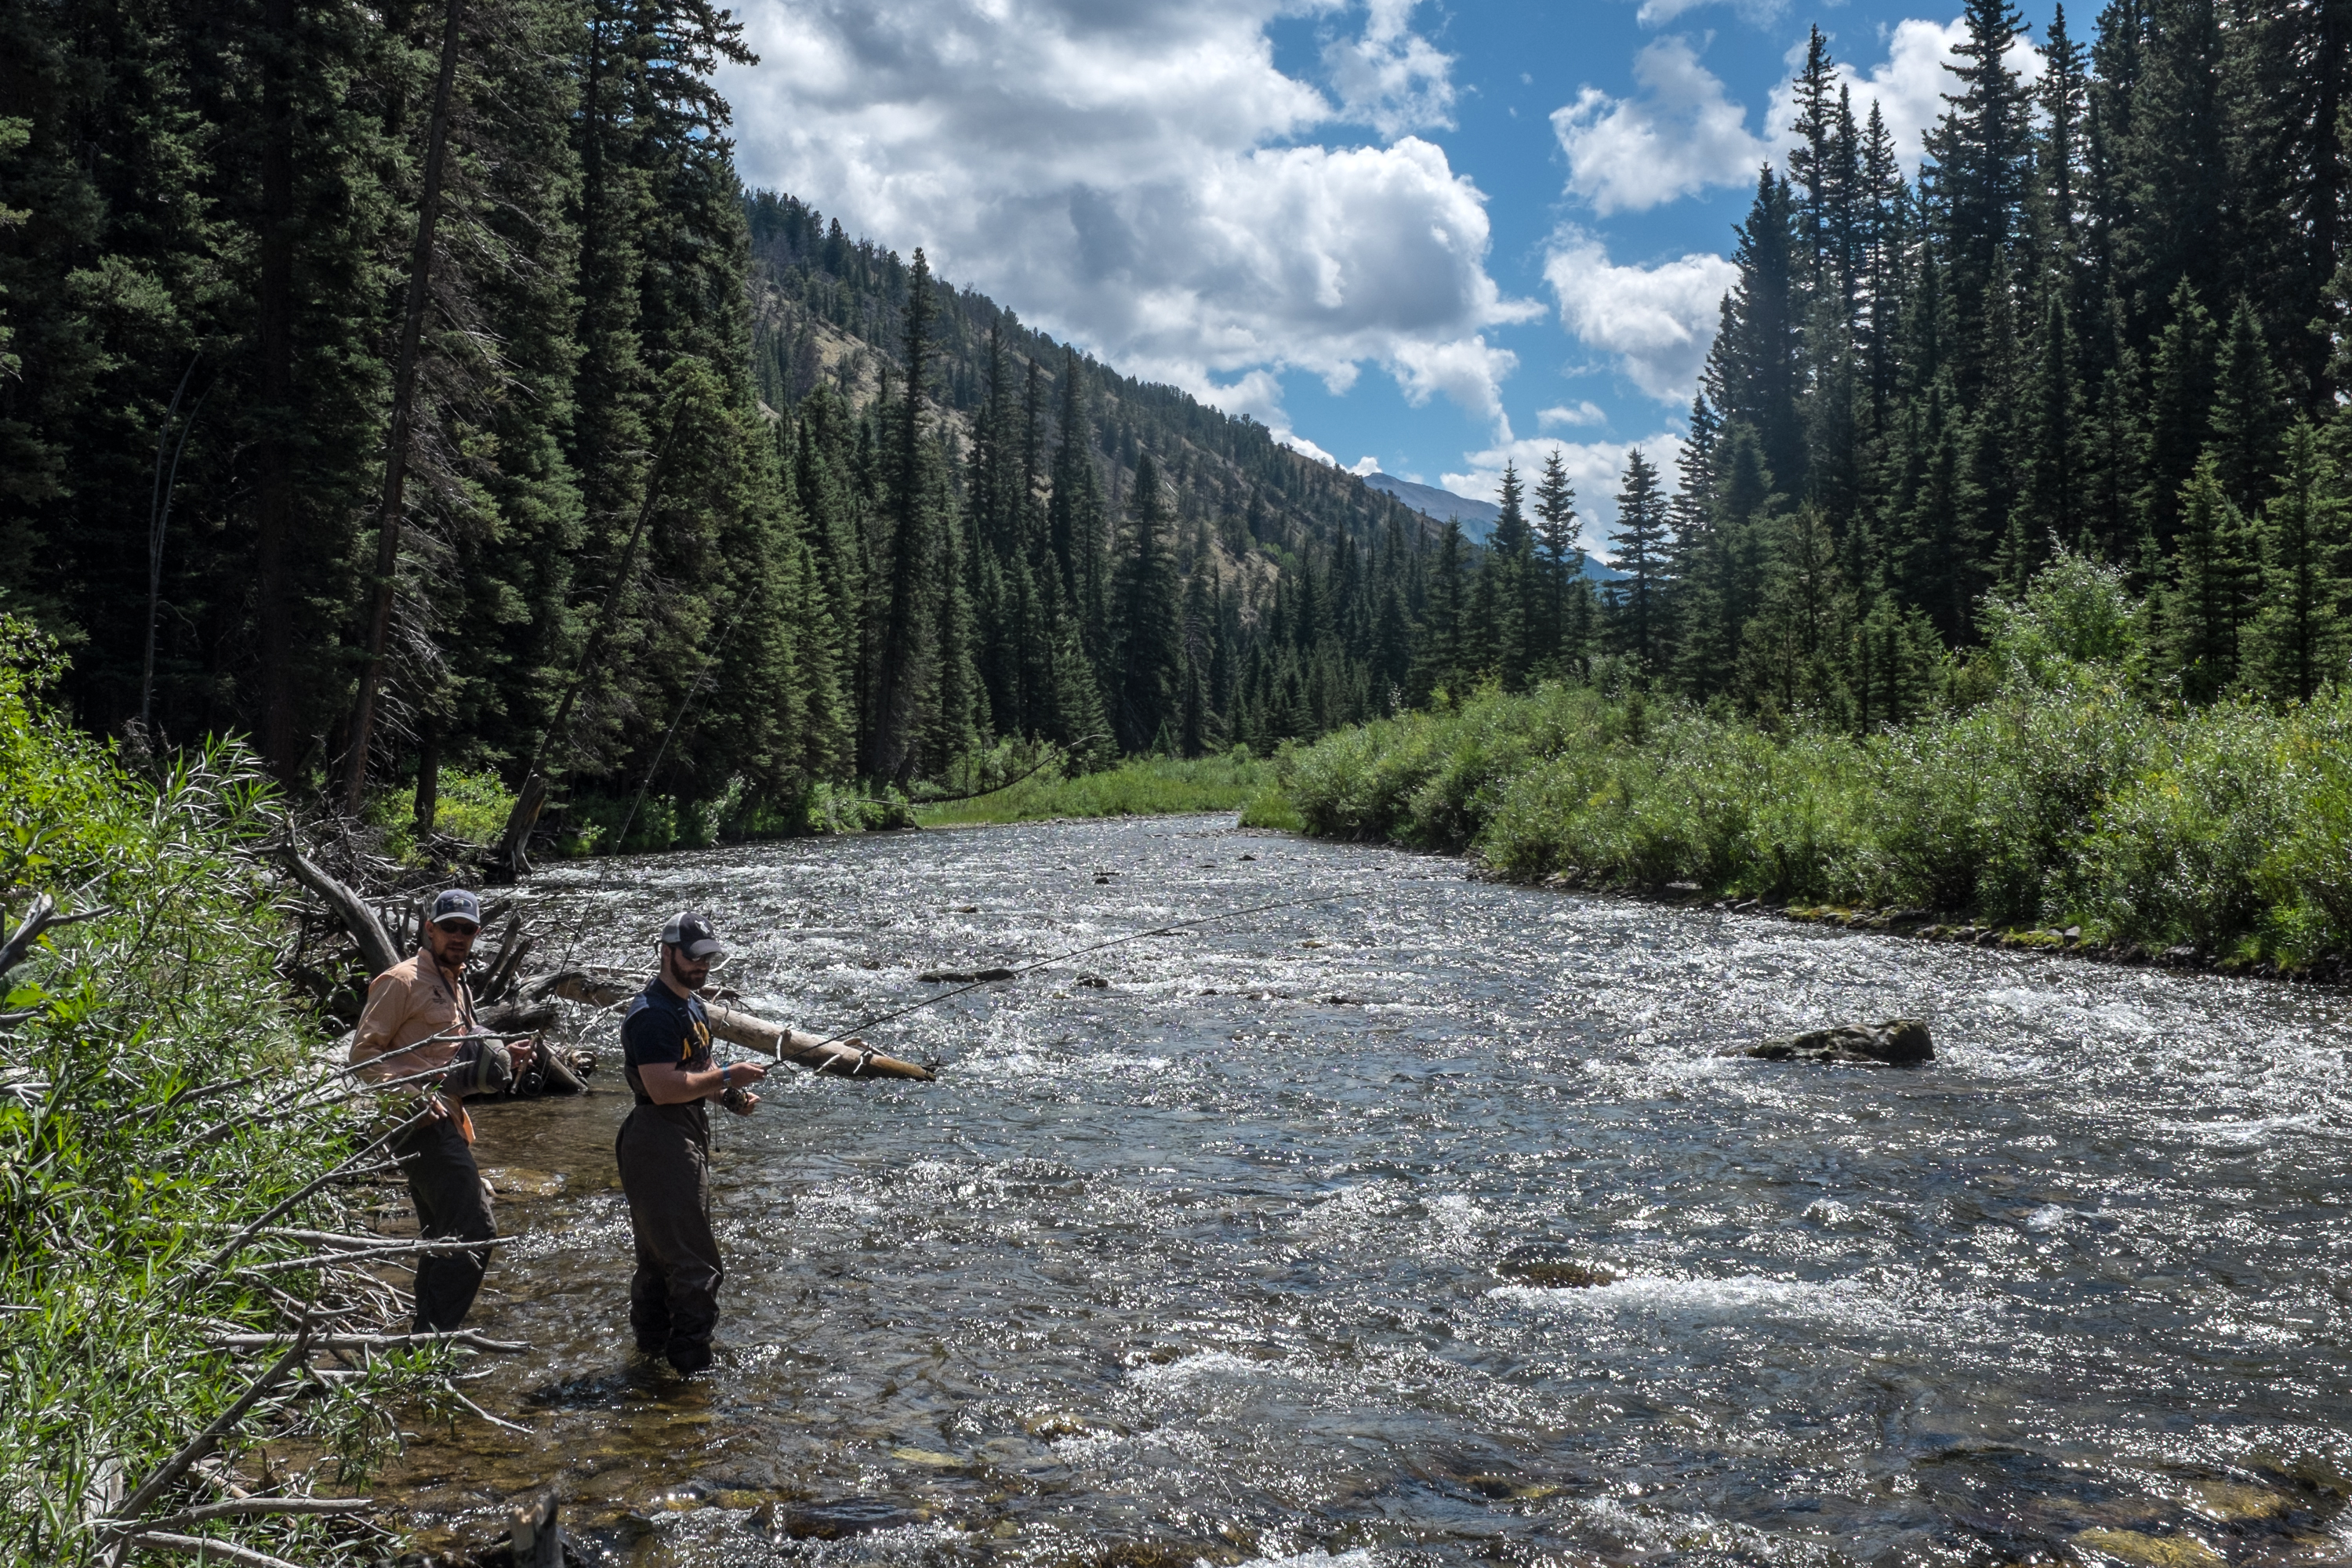 Fishing for Brown Trout and Steelhead on the High and Mighty